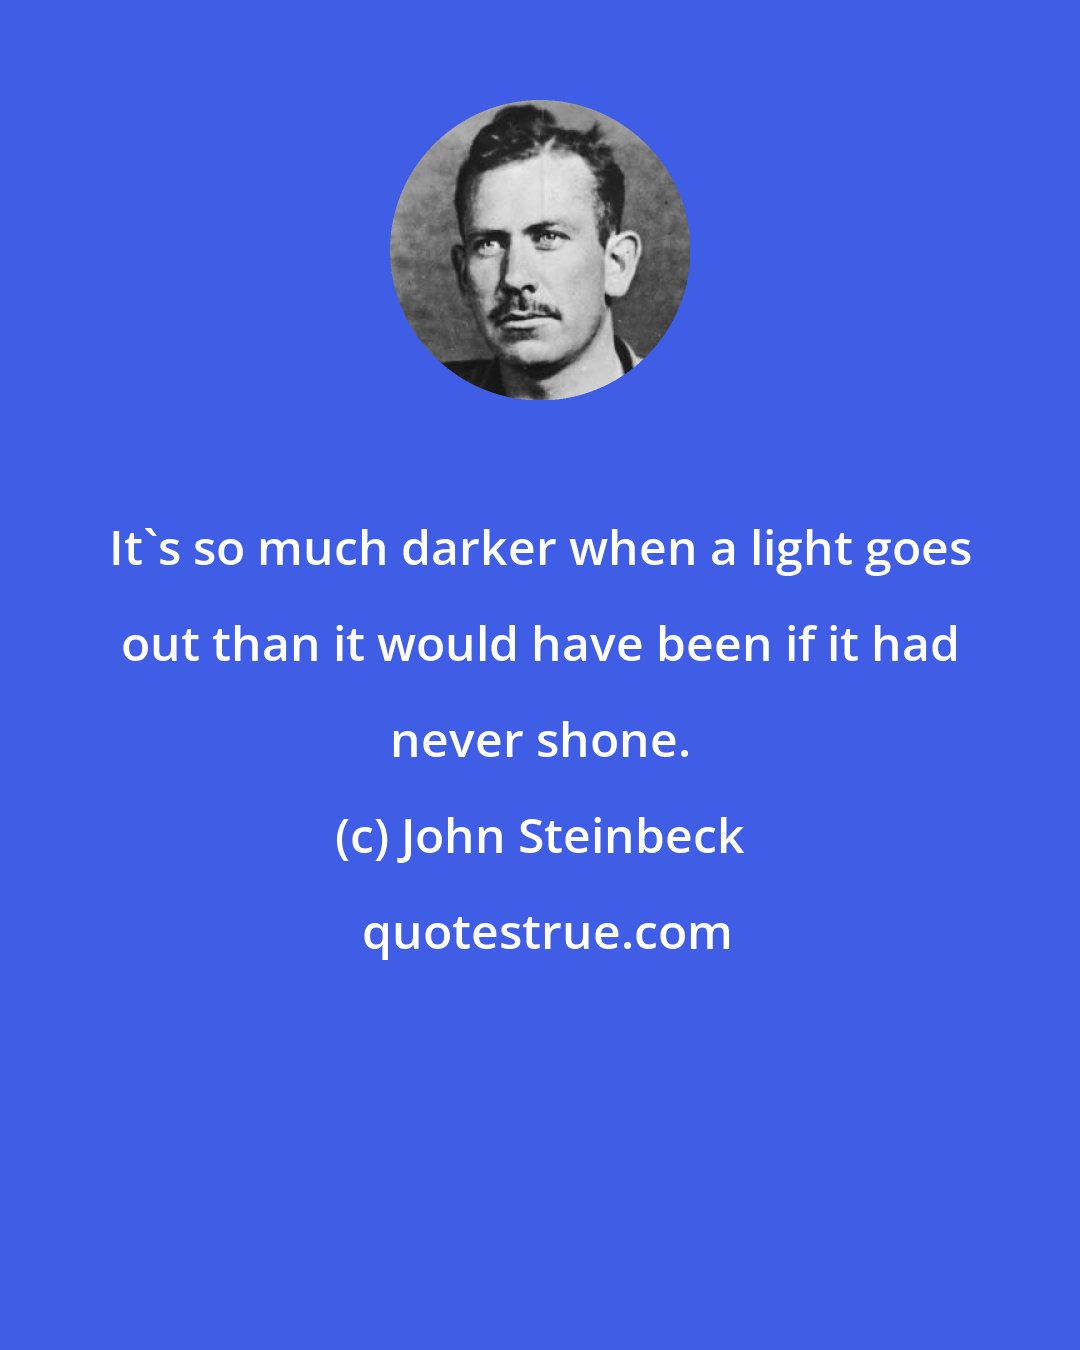 John Steinbeck: It's so much darker when a light goes out than it would have been if it had never shone.